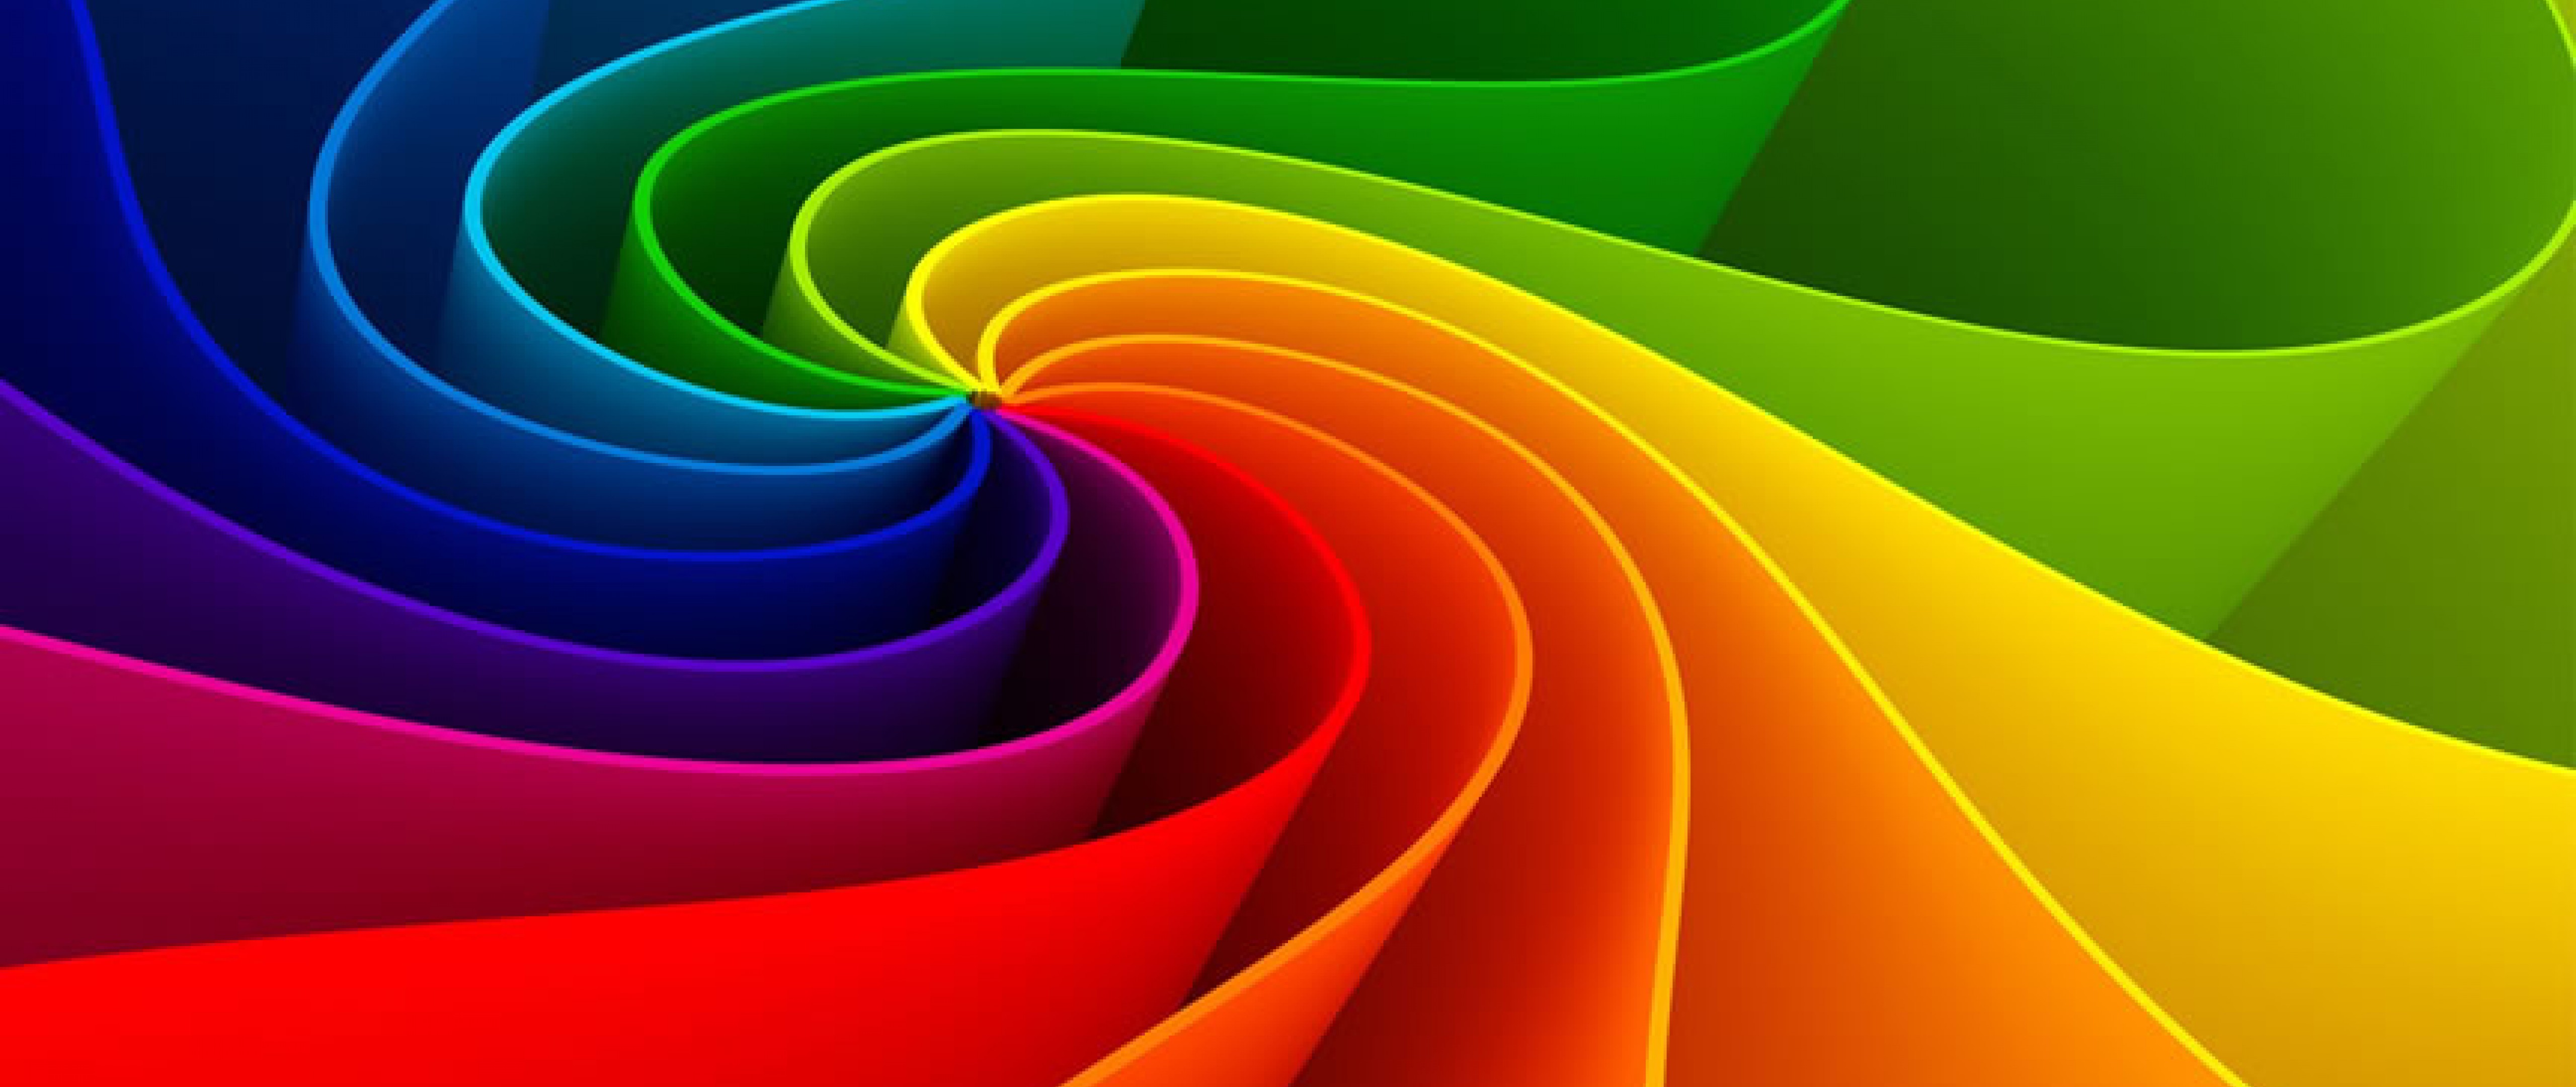 Abstract Coloured Line Wallpaper for Desktop and Mobiles 4K Ultra HD Wide TV - HD ...5120 x 2160